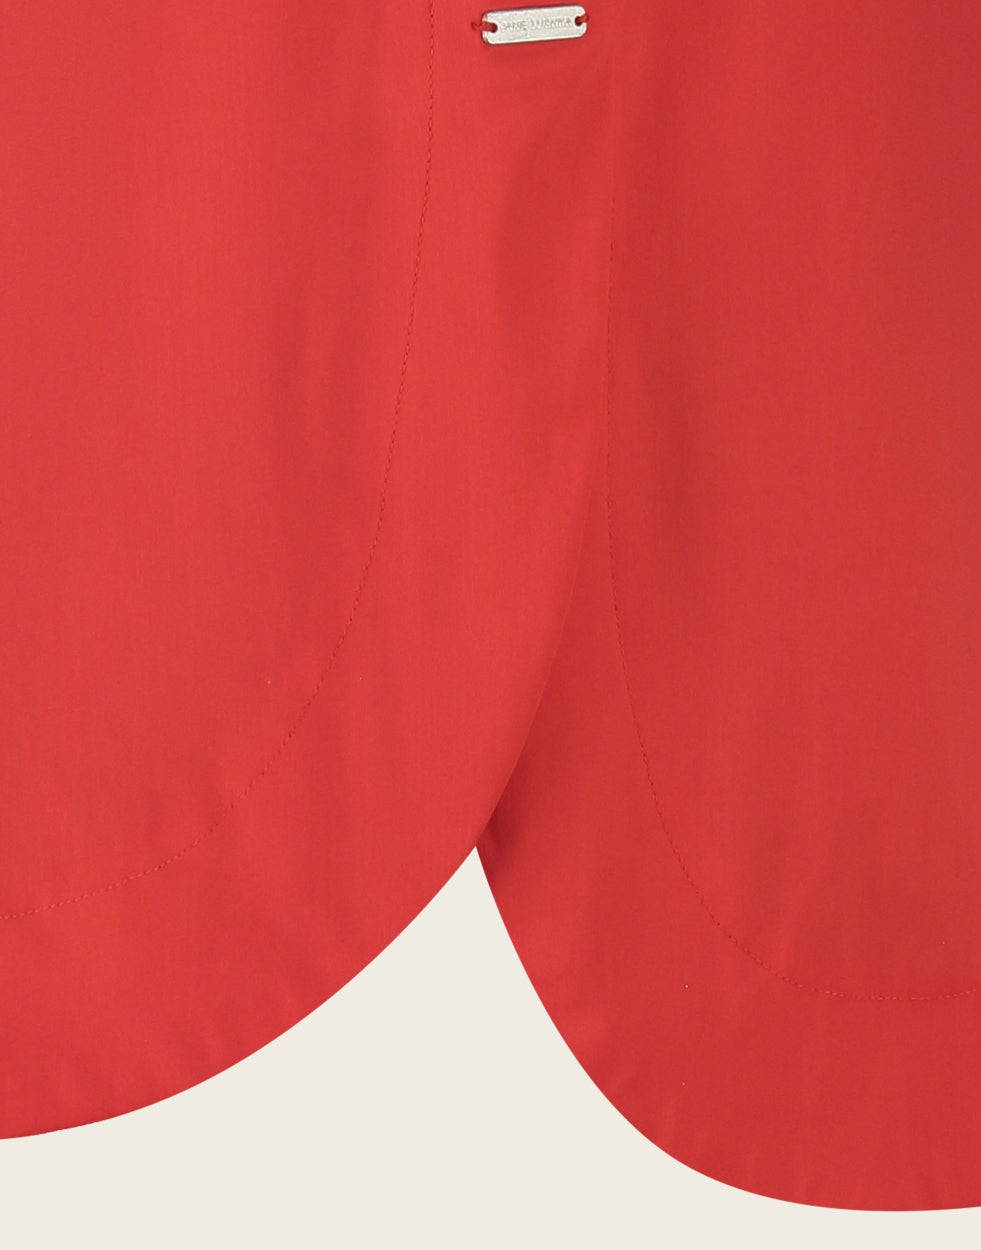 Dress Lucia/1 | Red